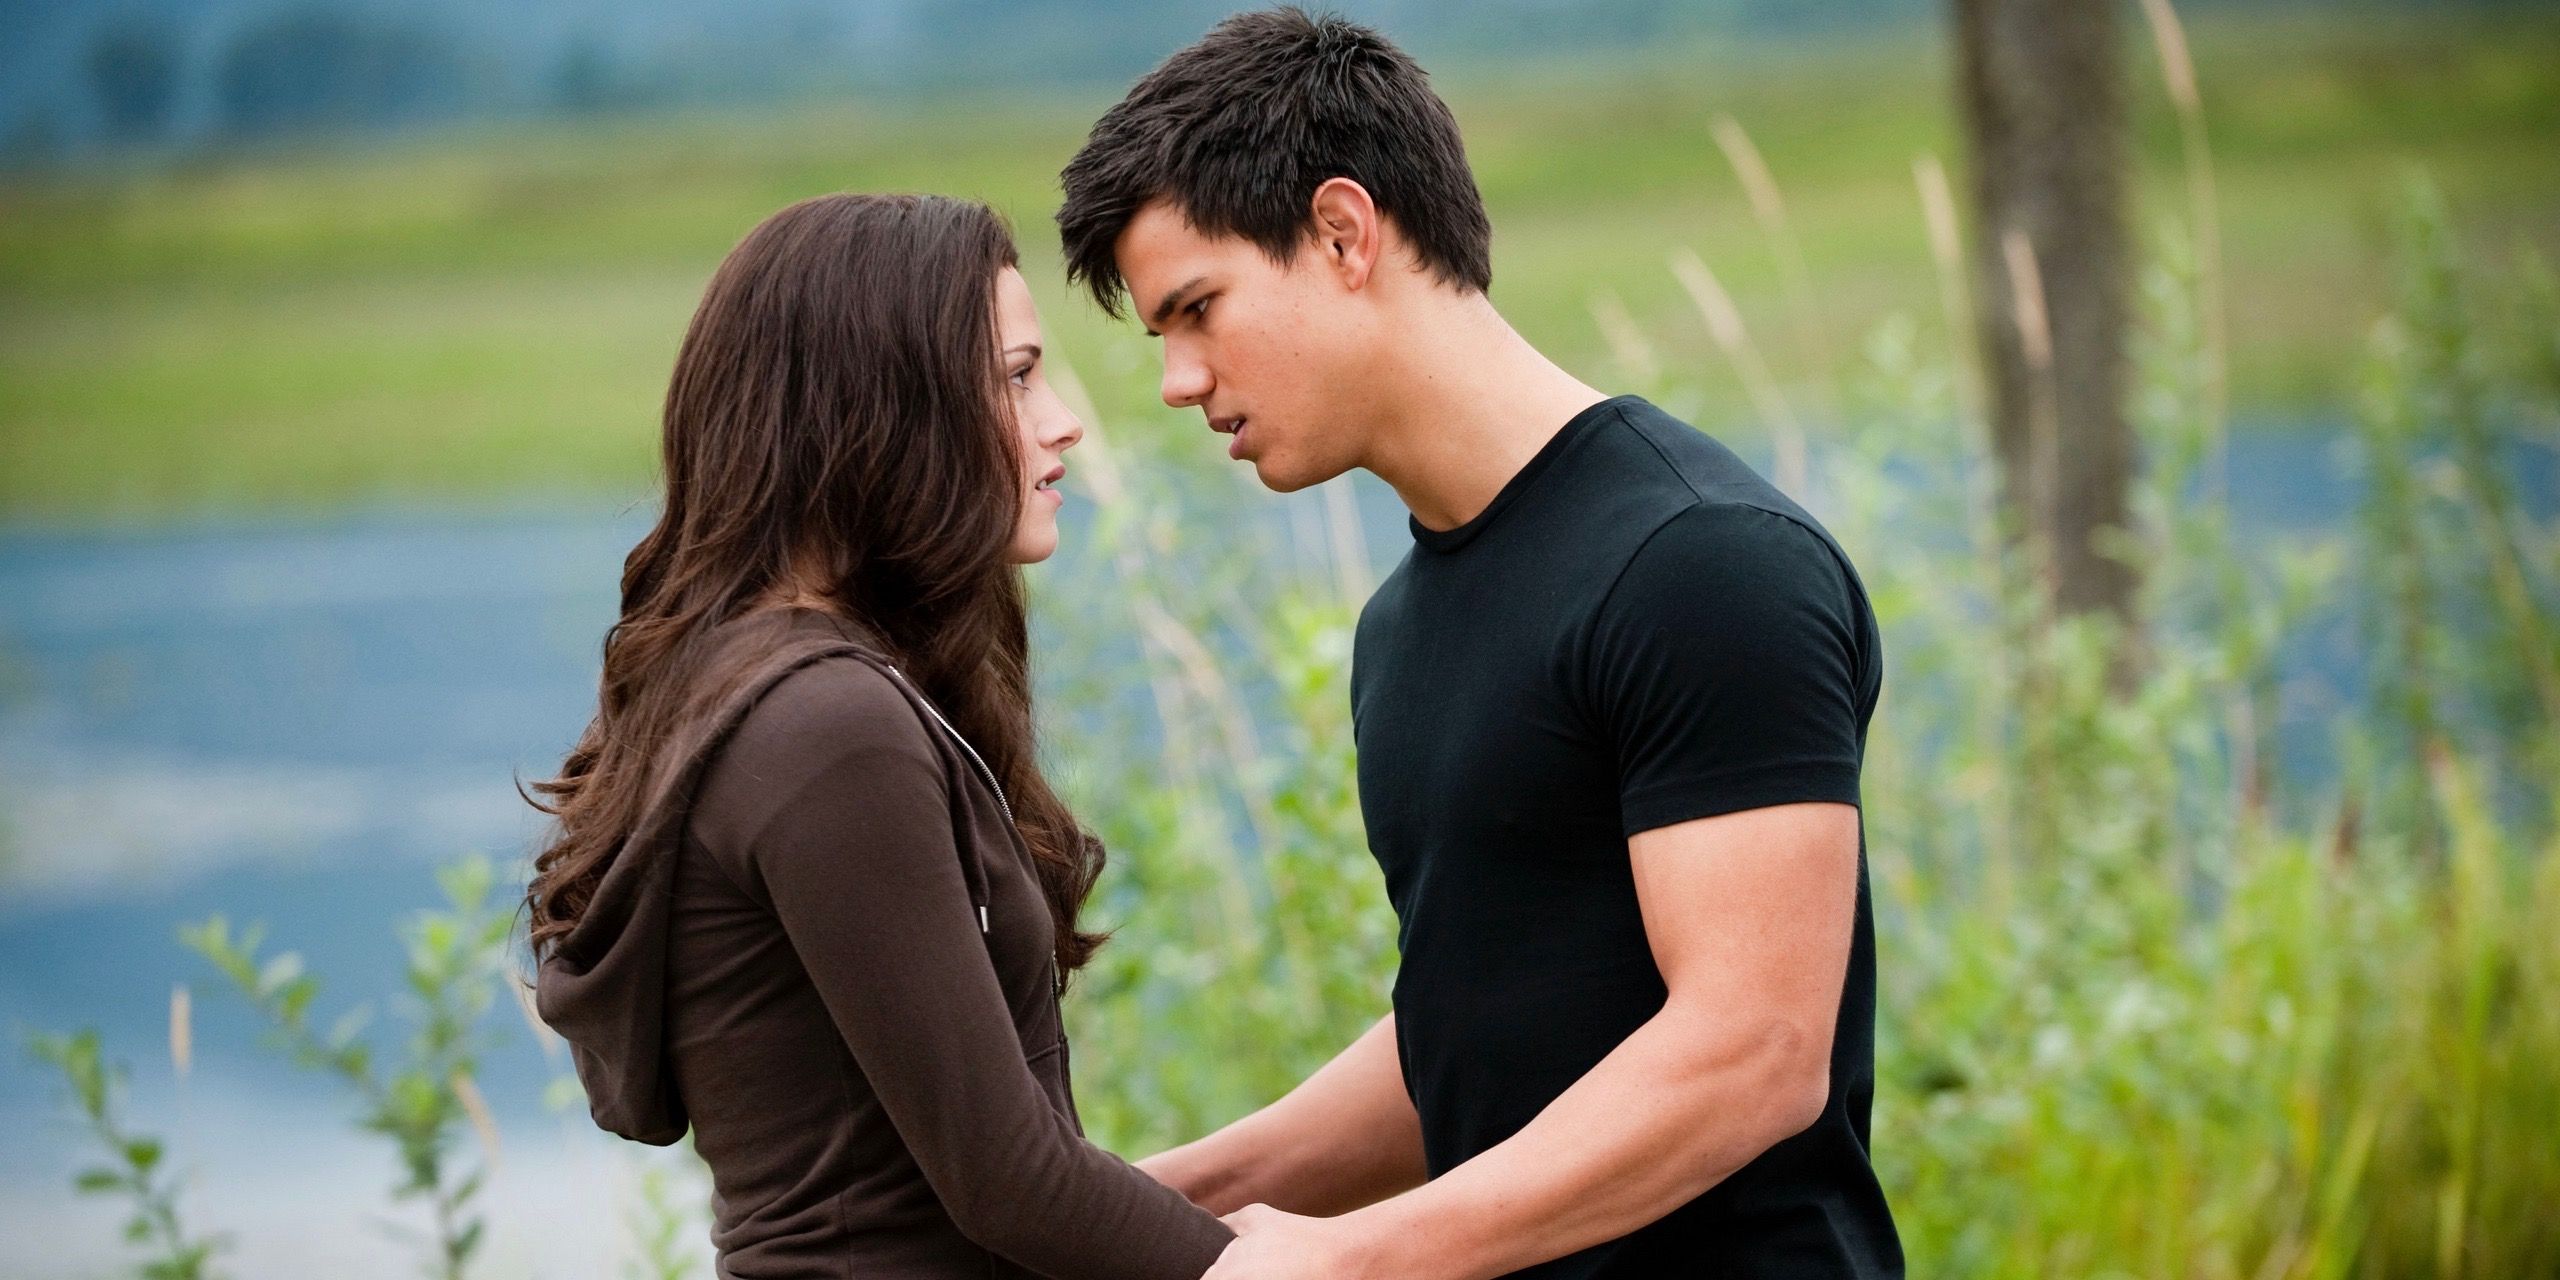 Taylor Lautner as Jacob and Kristen Stewart as Bella in The Twilight Saga Eclipse